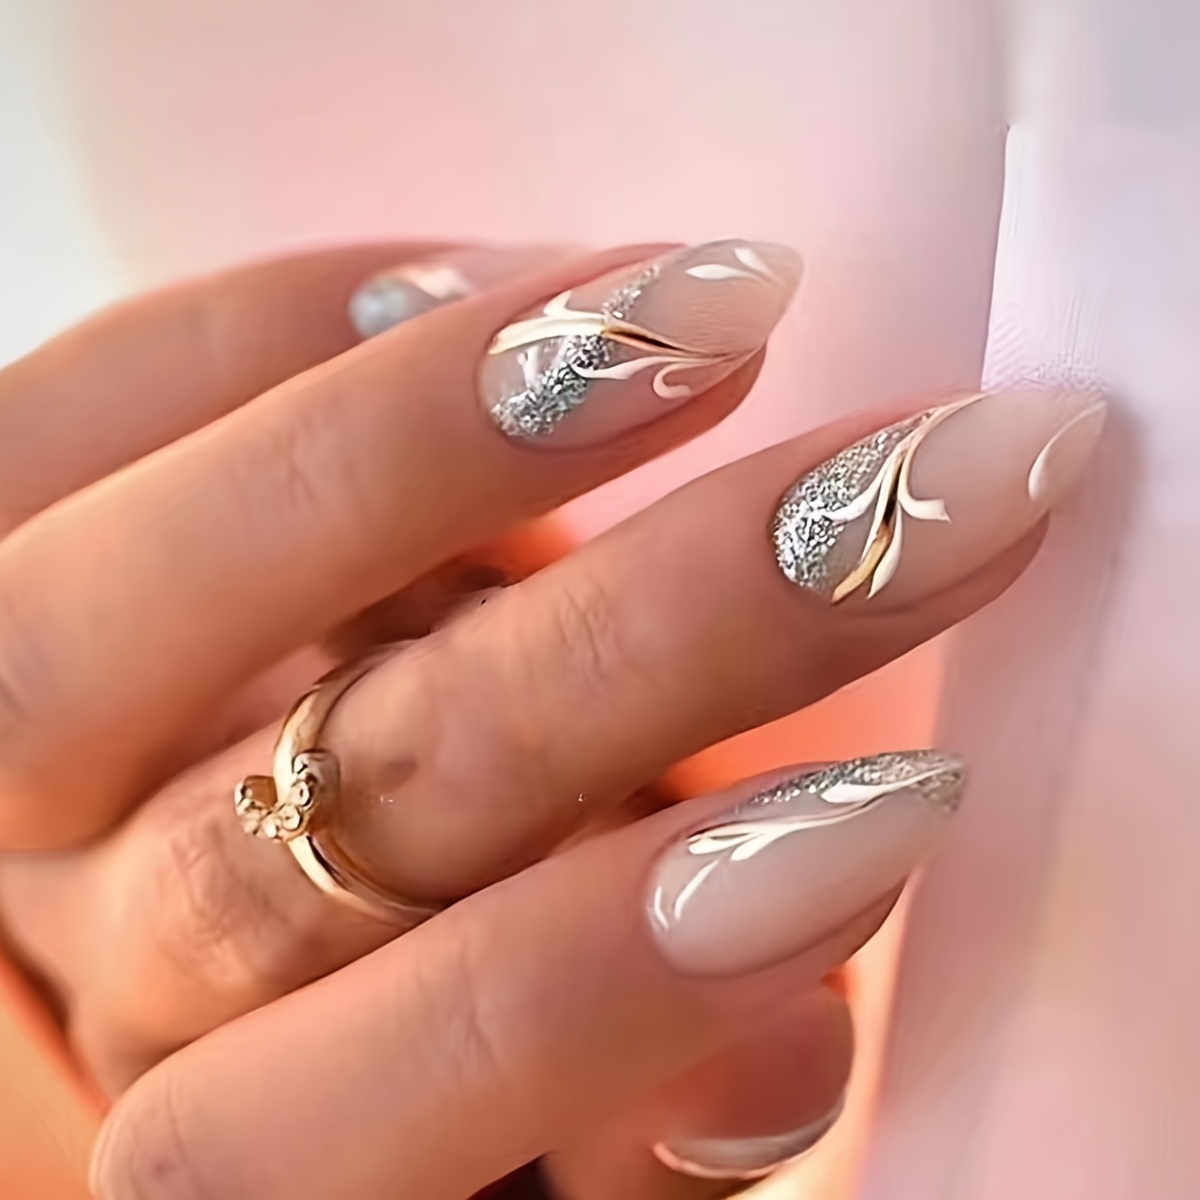 

24pcs Glossy Medium Almond Press On Nails, Sparkle Fake Nails With Golden Line Design, Shimmer False Nails For Women Girls